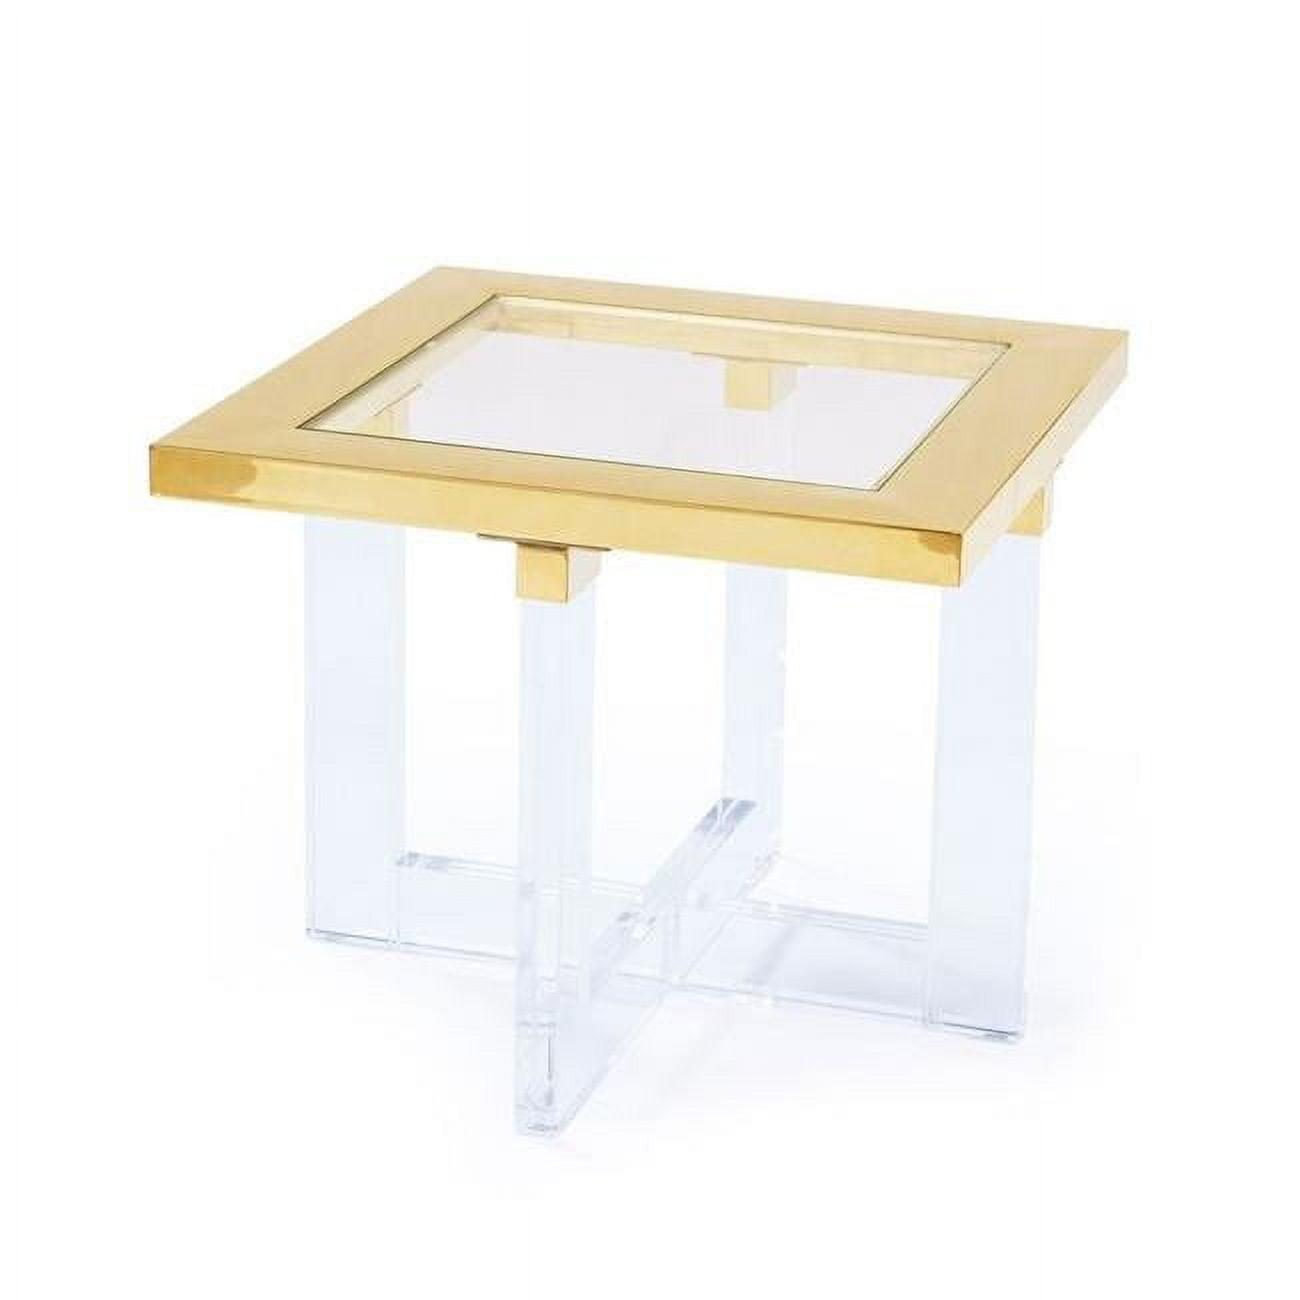 Gold and Clear Acrylic Square Side Table with Glass Top